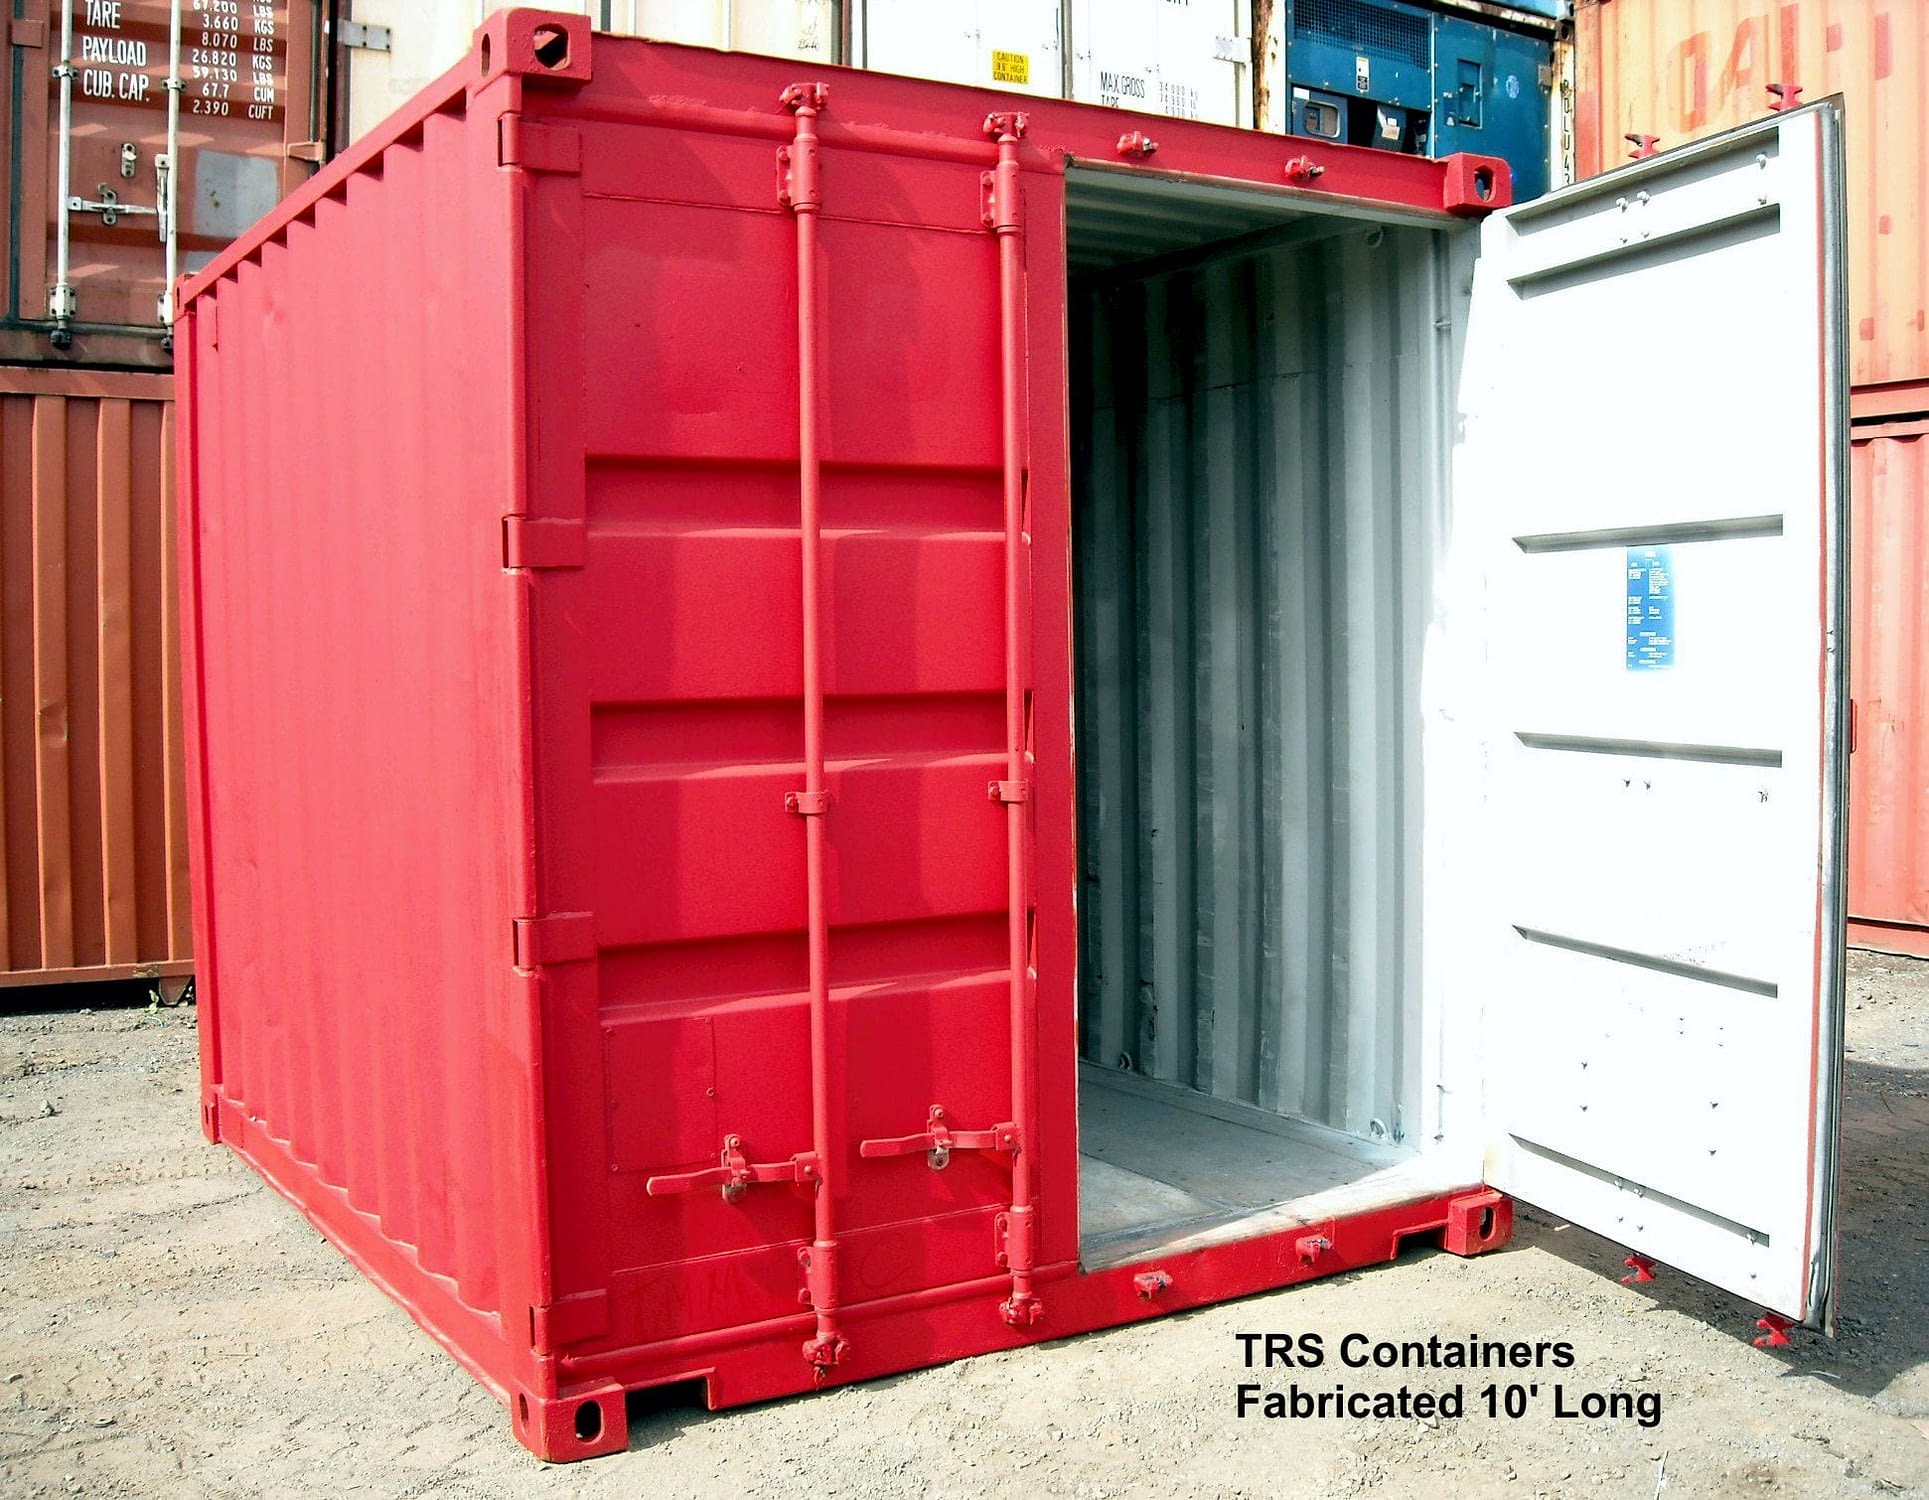 TRS Containers sells, rents and modifies 10 foot long steel containers for the construction industry.